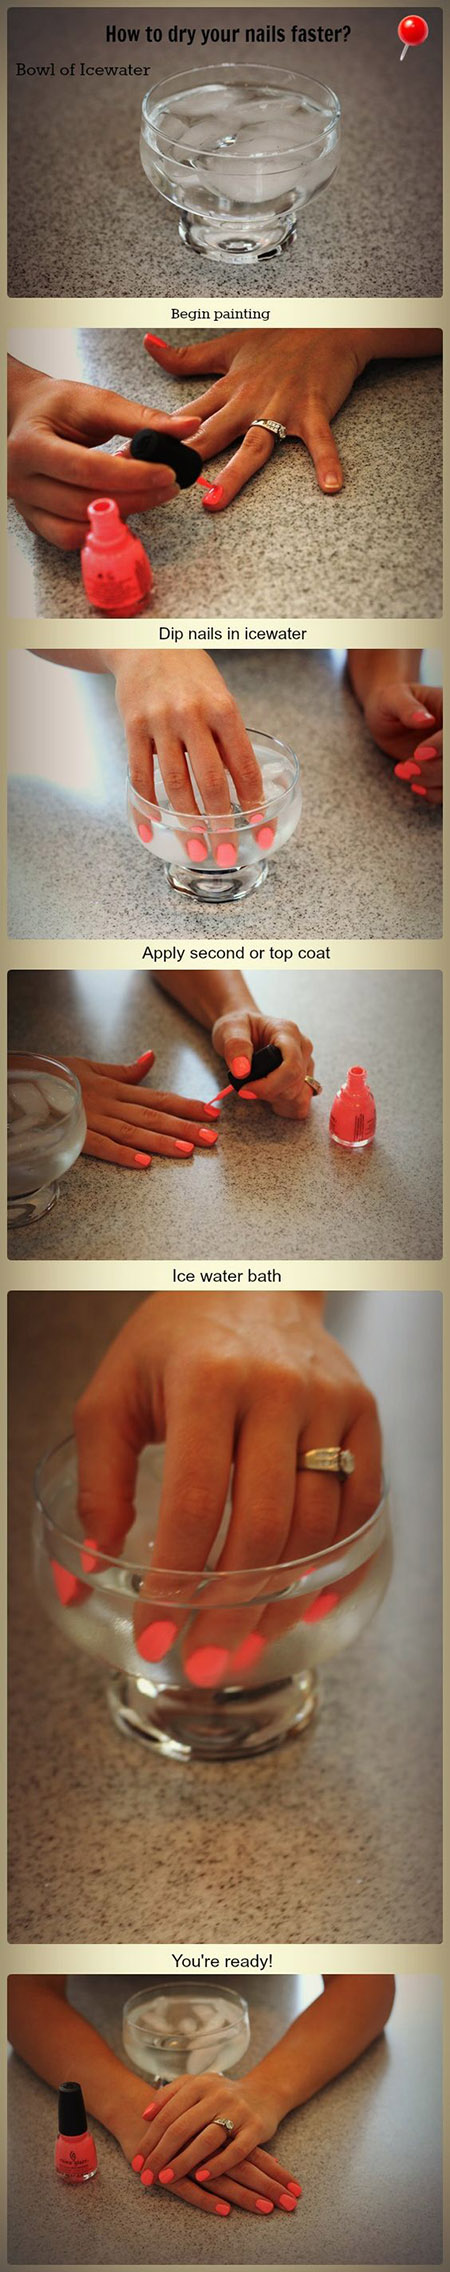 How to dry your nails fast and easy | Useful Tutorials